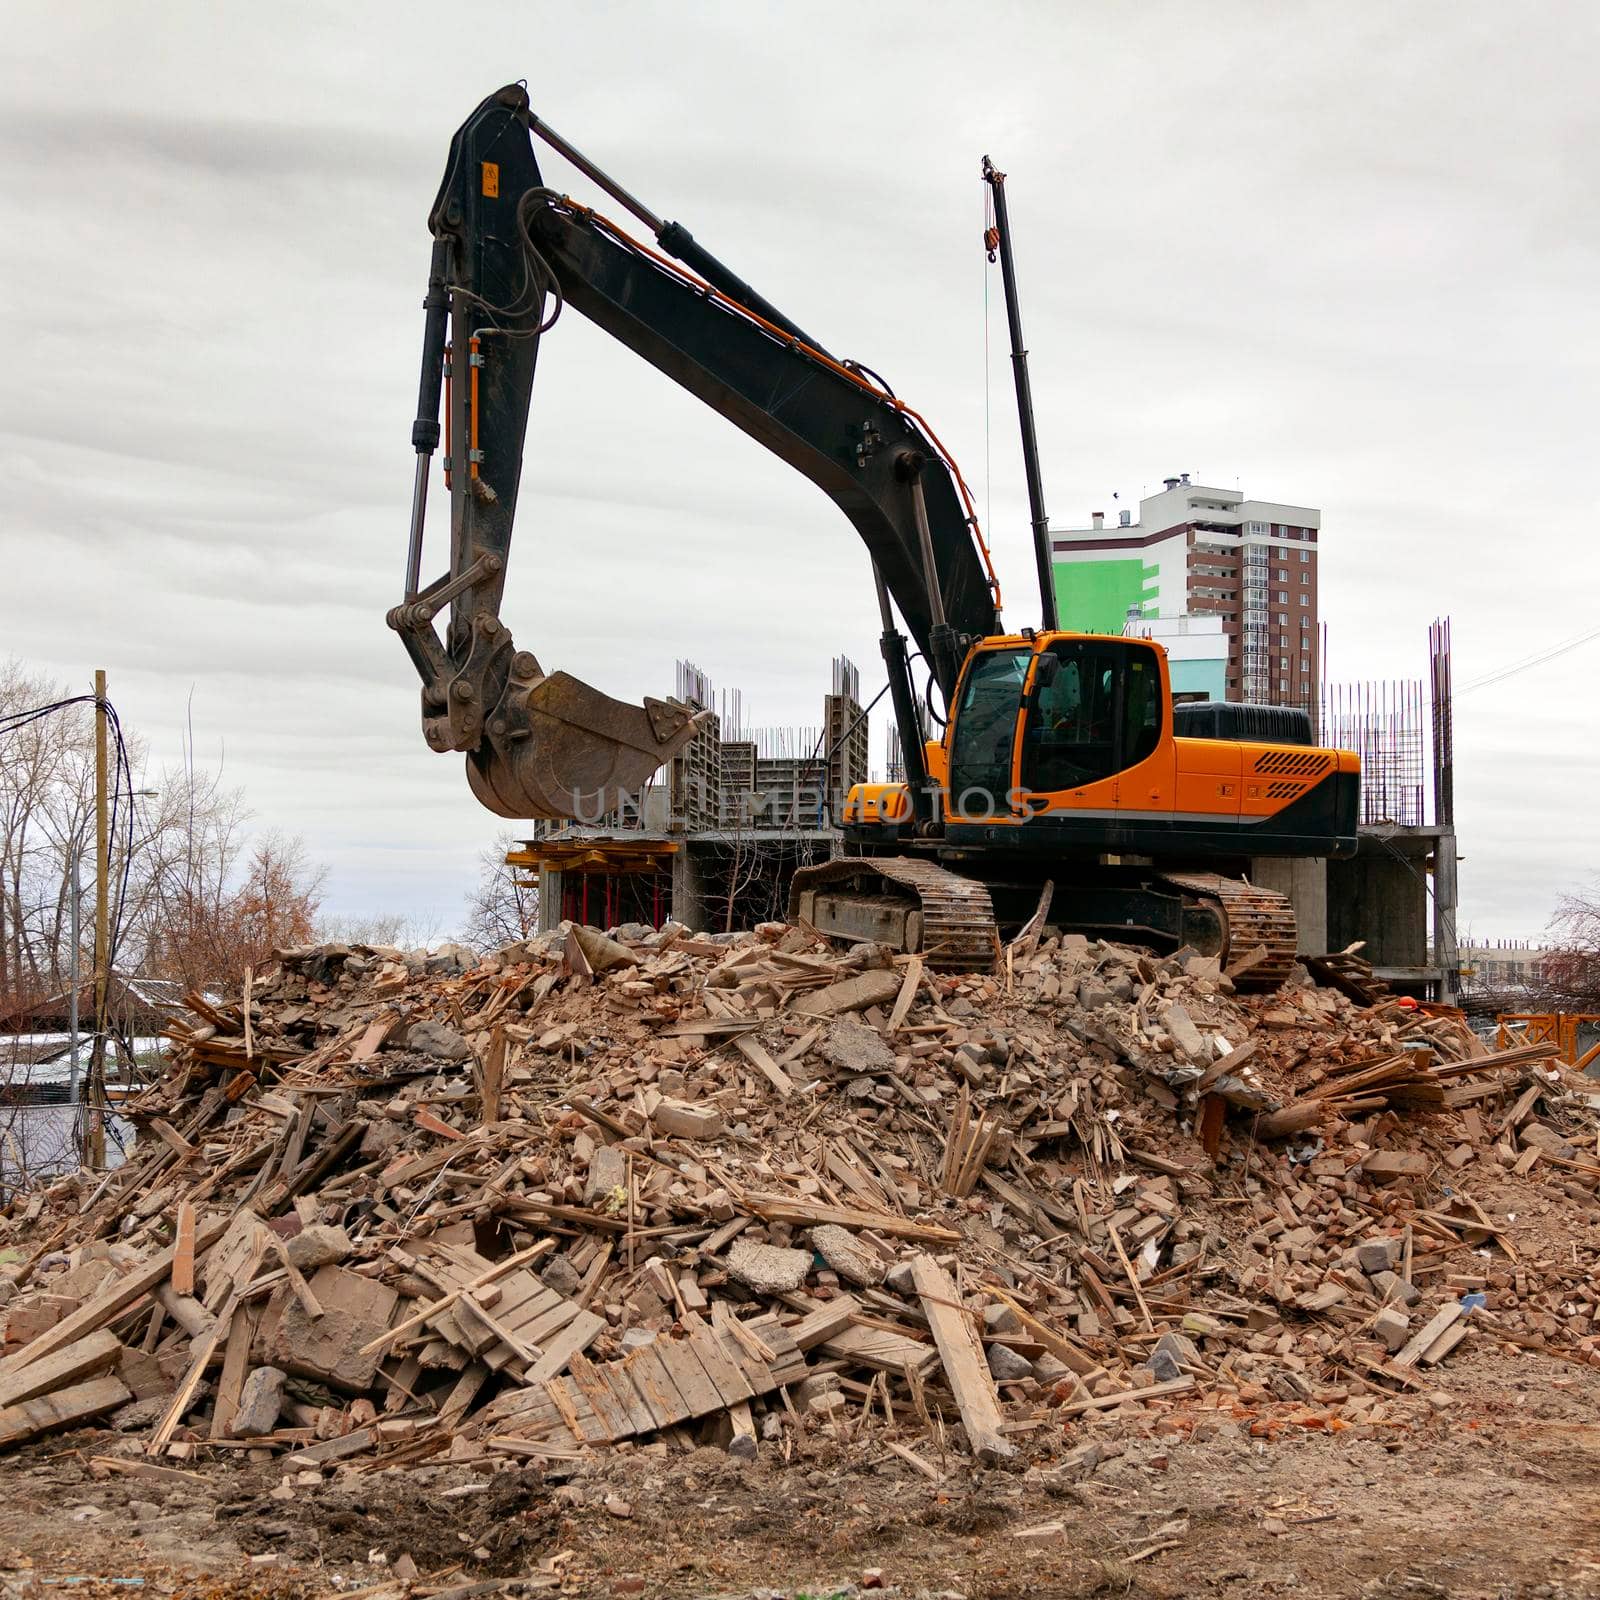 Demolition of an old building by modern excavator